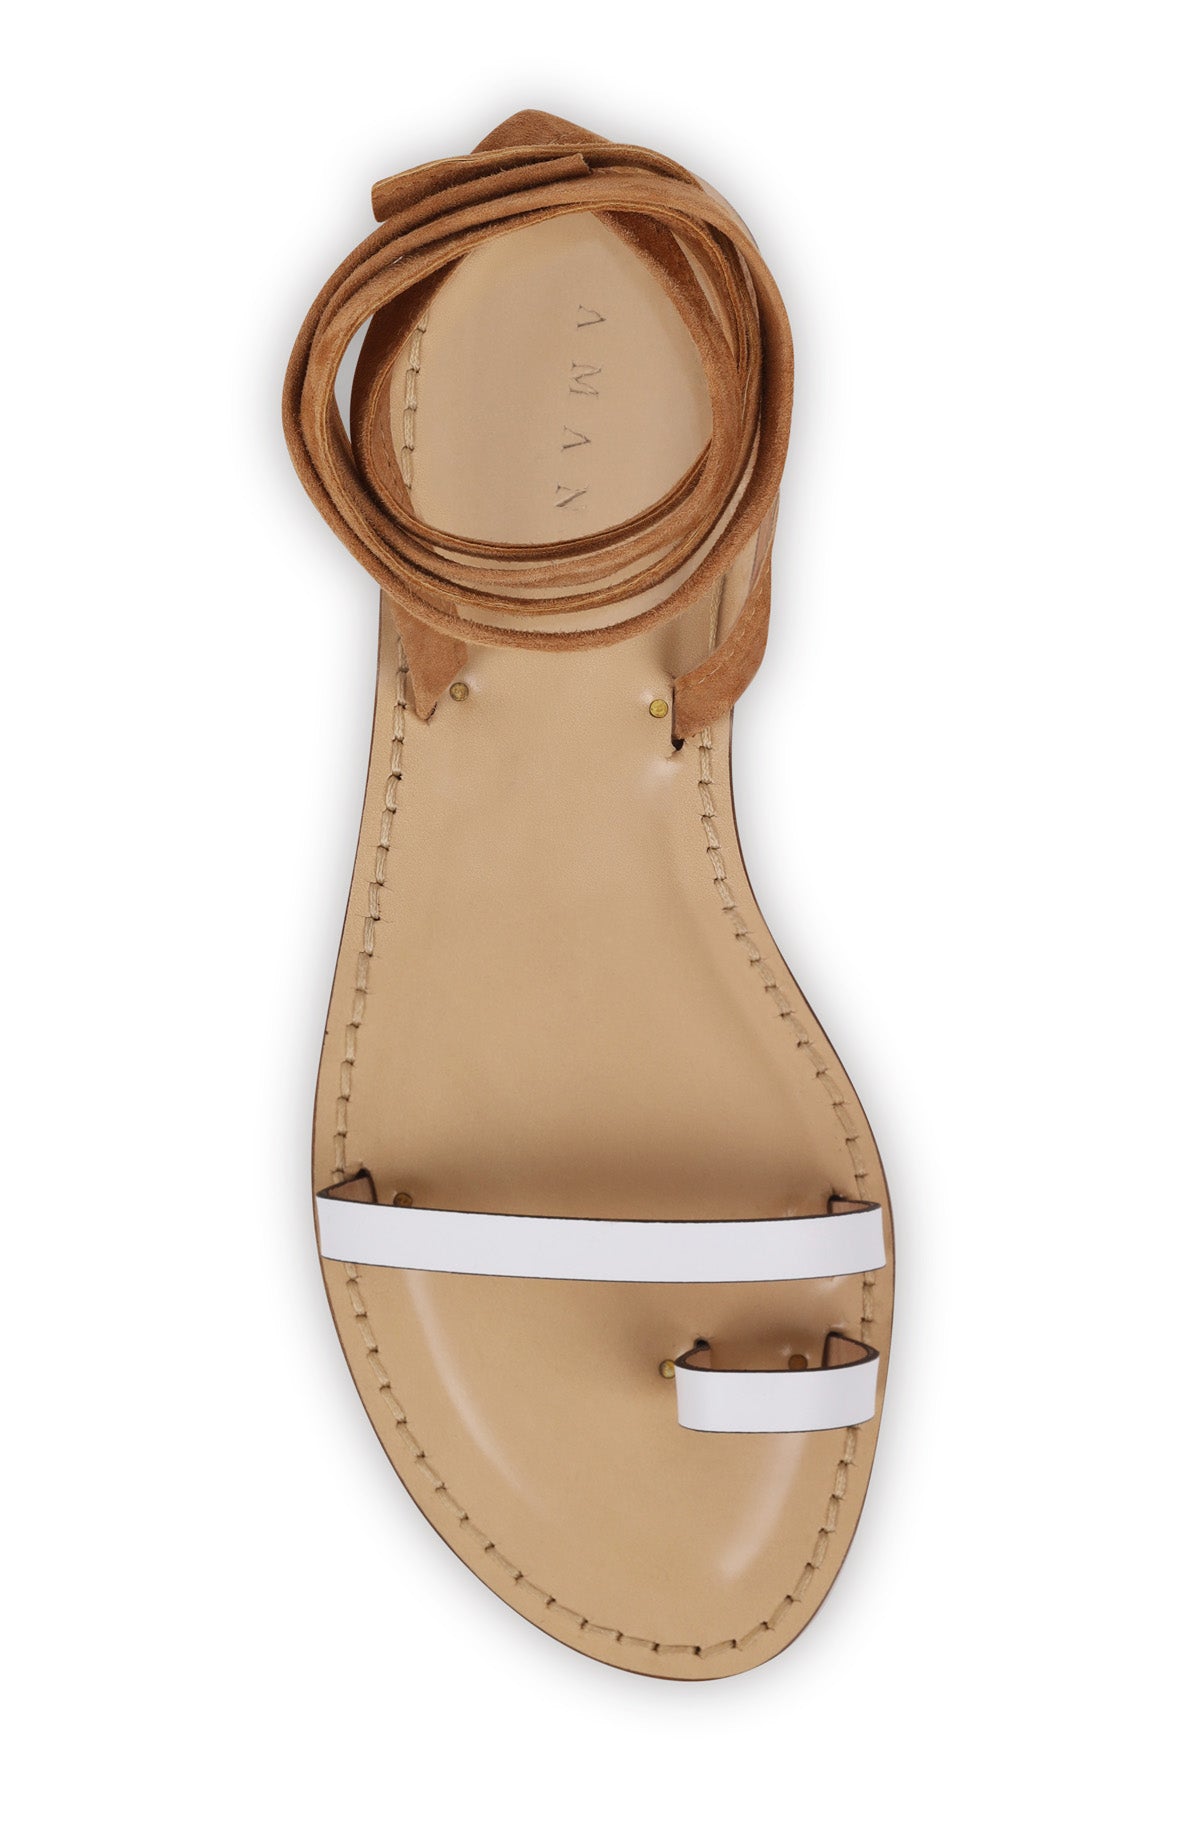 Style 08 | The Stellenbosch | White Leather + Nude Suede Ties | Nude Sole